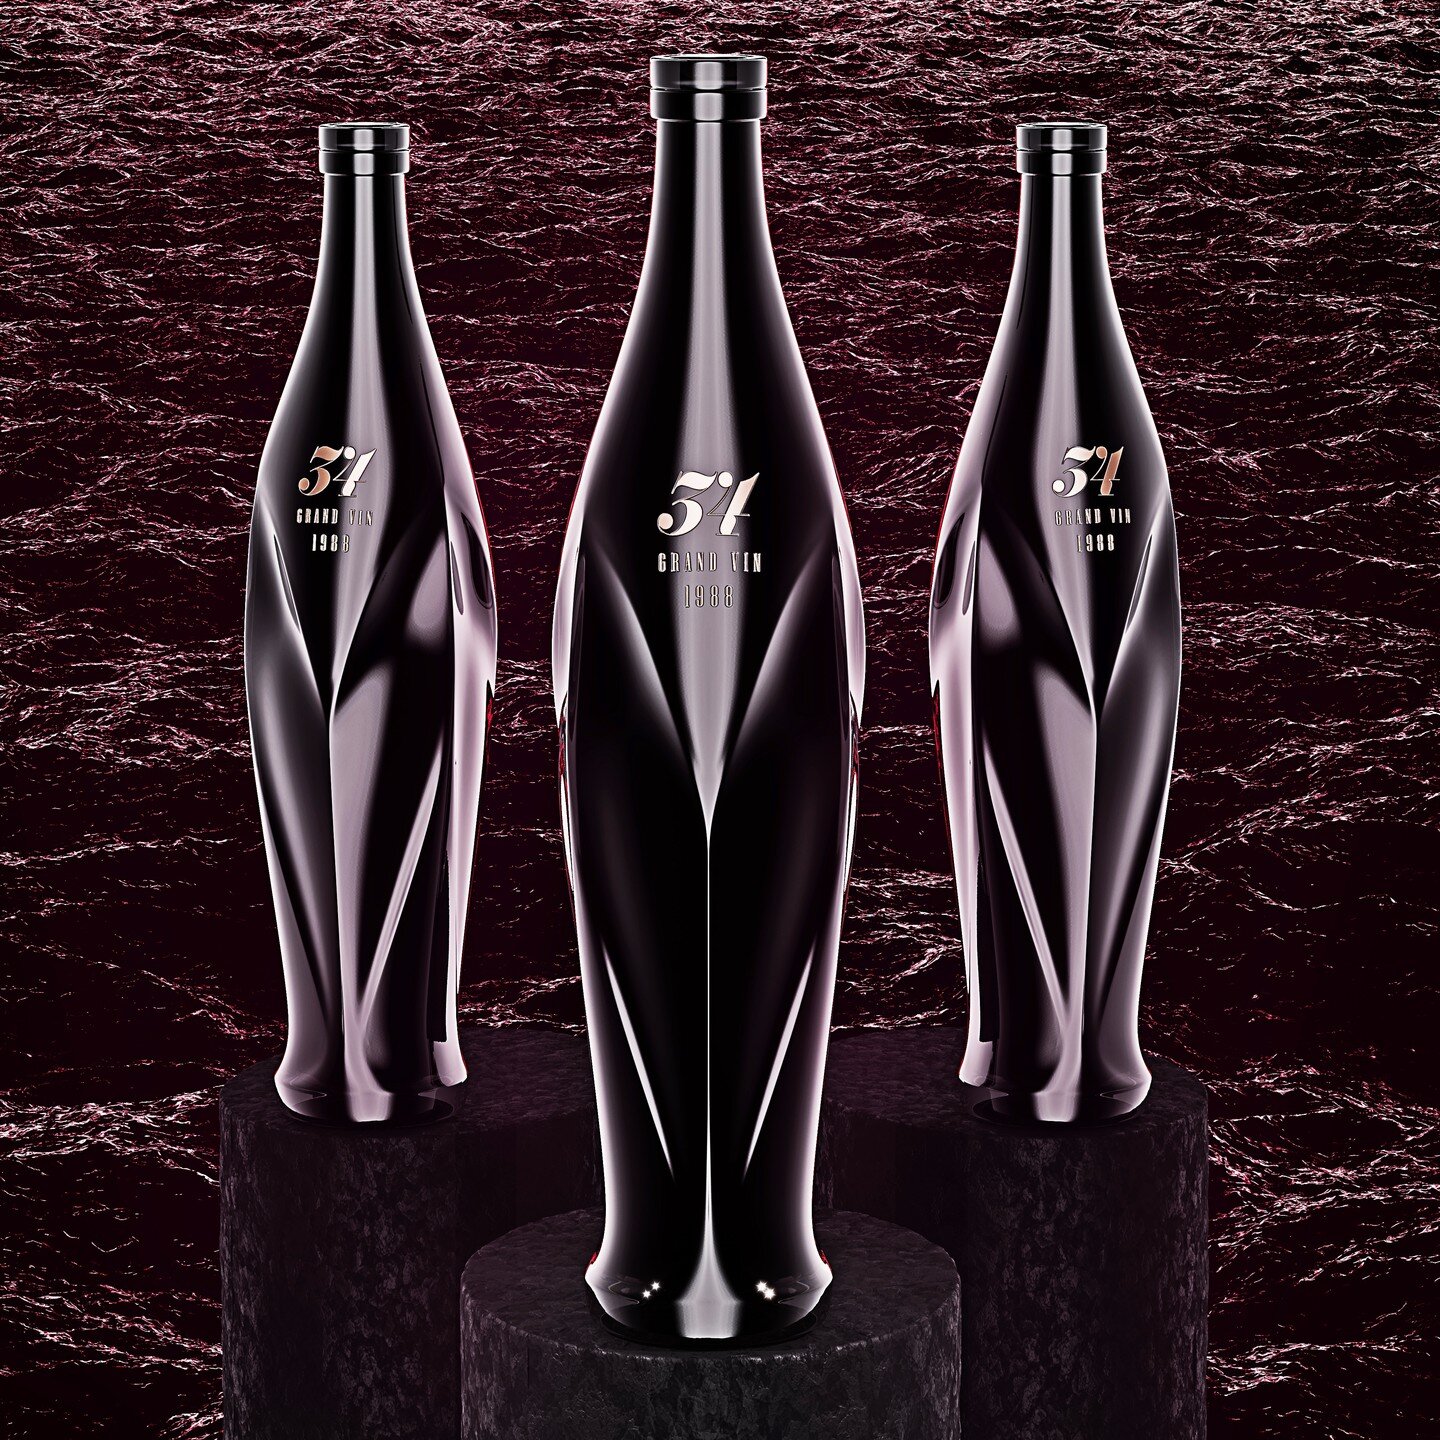 Sea of Burgundy.

34 is suitable for premium red wines. The bottle can be black, white or covered with a gradient. The only recommended closure is @vinolok_global